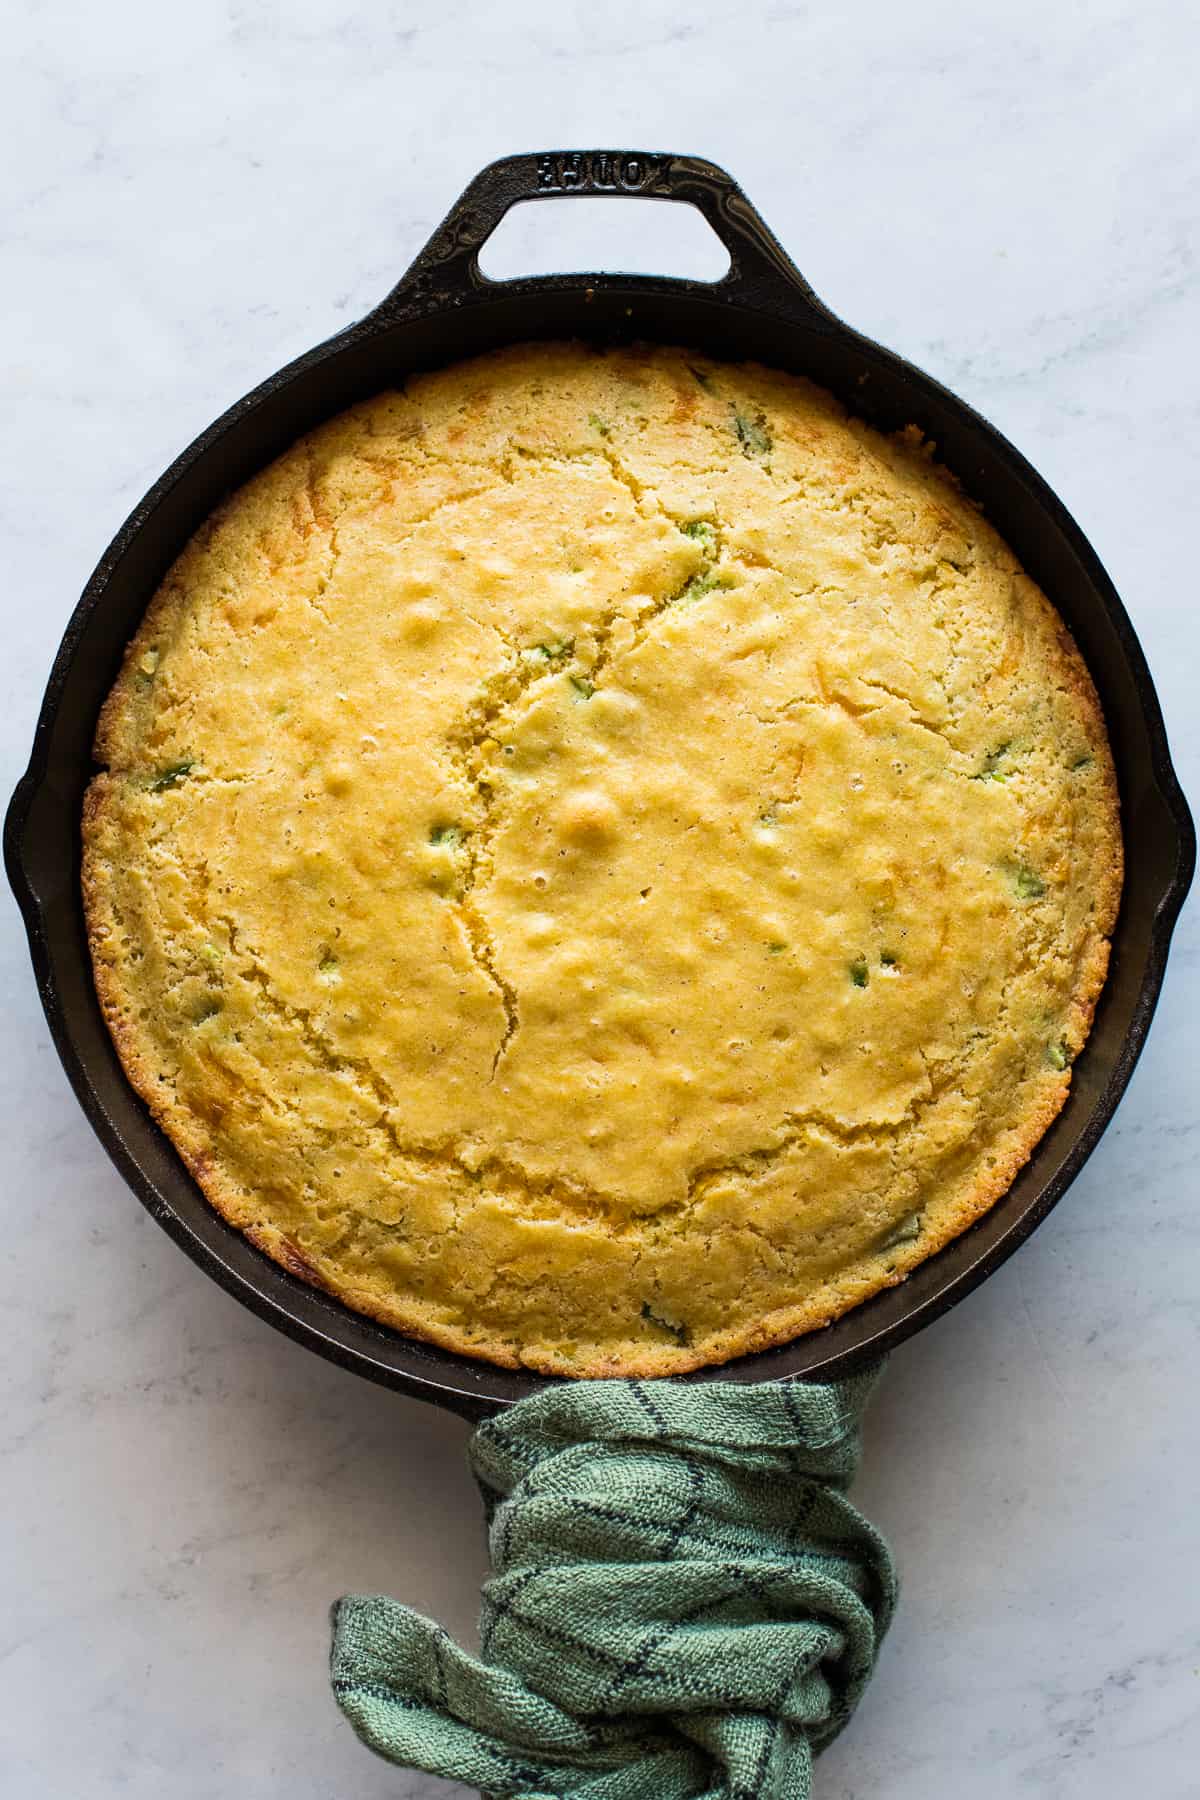 Easy Jalapeño Cornbread baked in a cast iron skillet ready to eat.